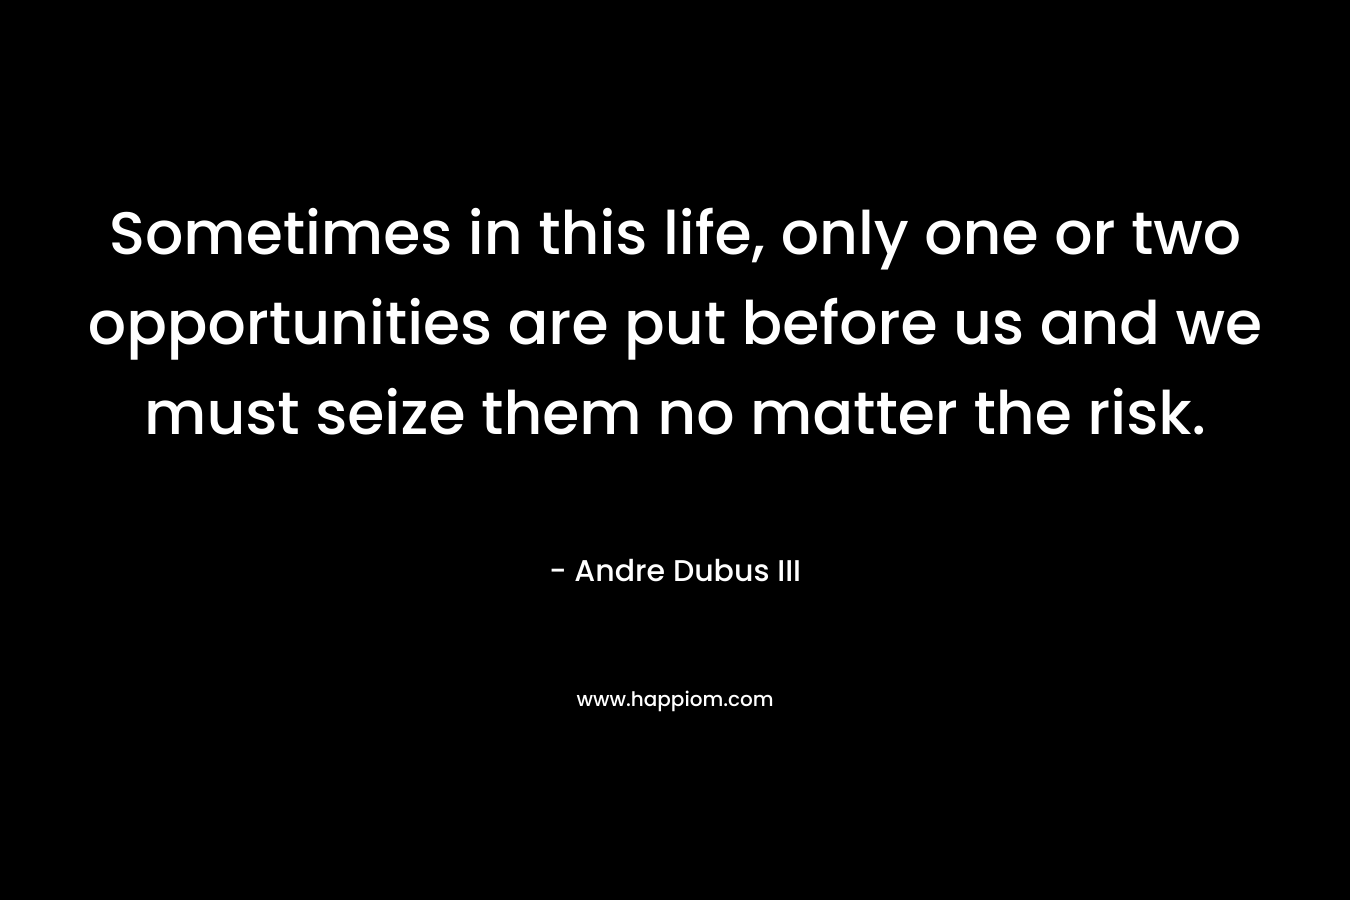 Sometimes in this life, only one or two opportunities are put before us and we must seize them no matter the risk.